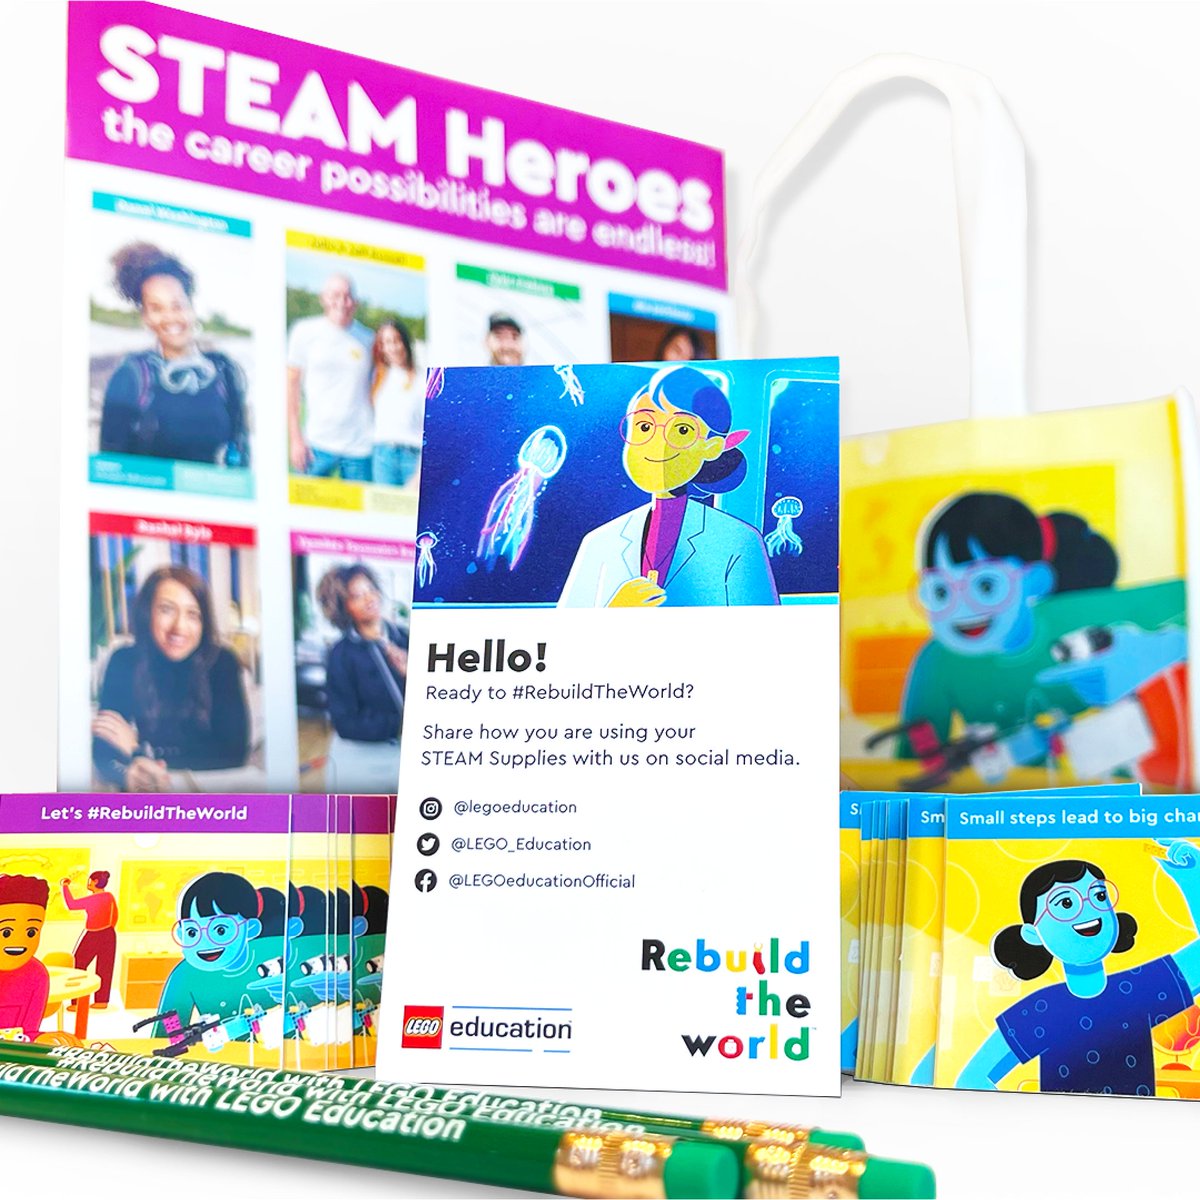 #RebuildTheWorld by grabbing your own STEAM supplies! Items include a poster, stickers, pencils, and a tote. Visit the Career Toolkit page and scroll to the form to claim your free supplies: bit.ly/3tLd5Vq